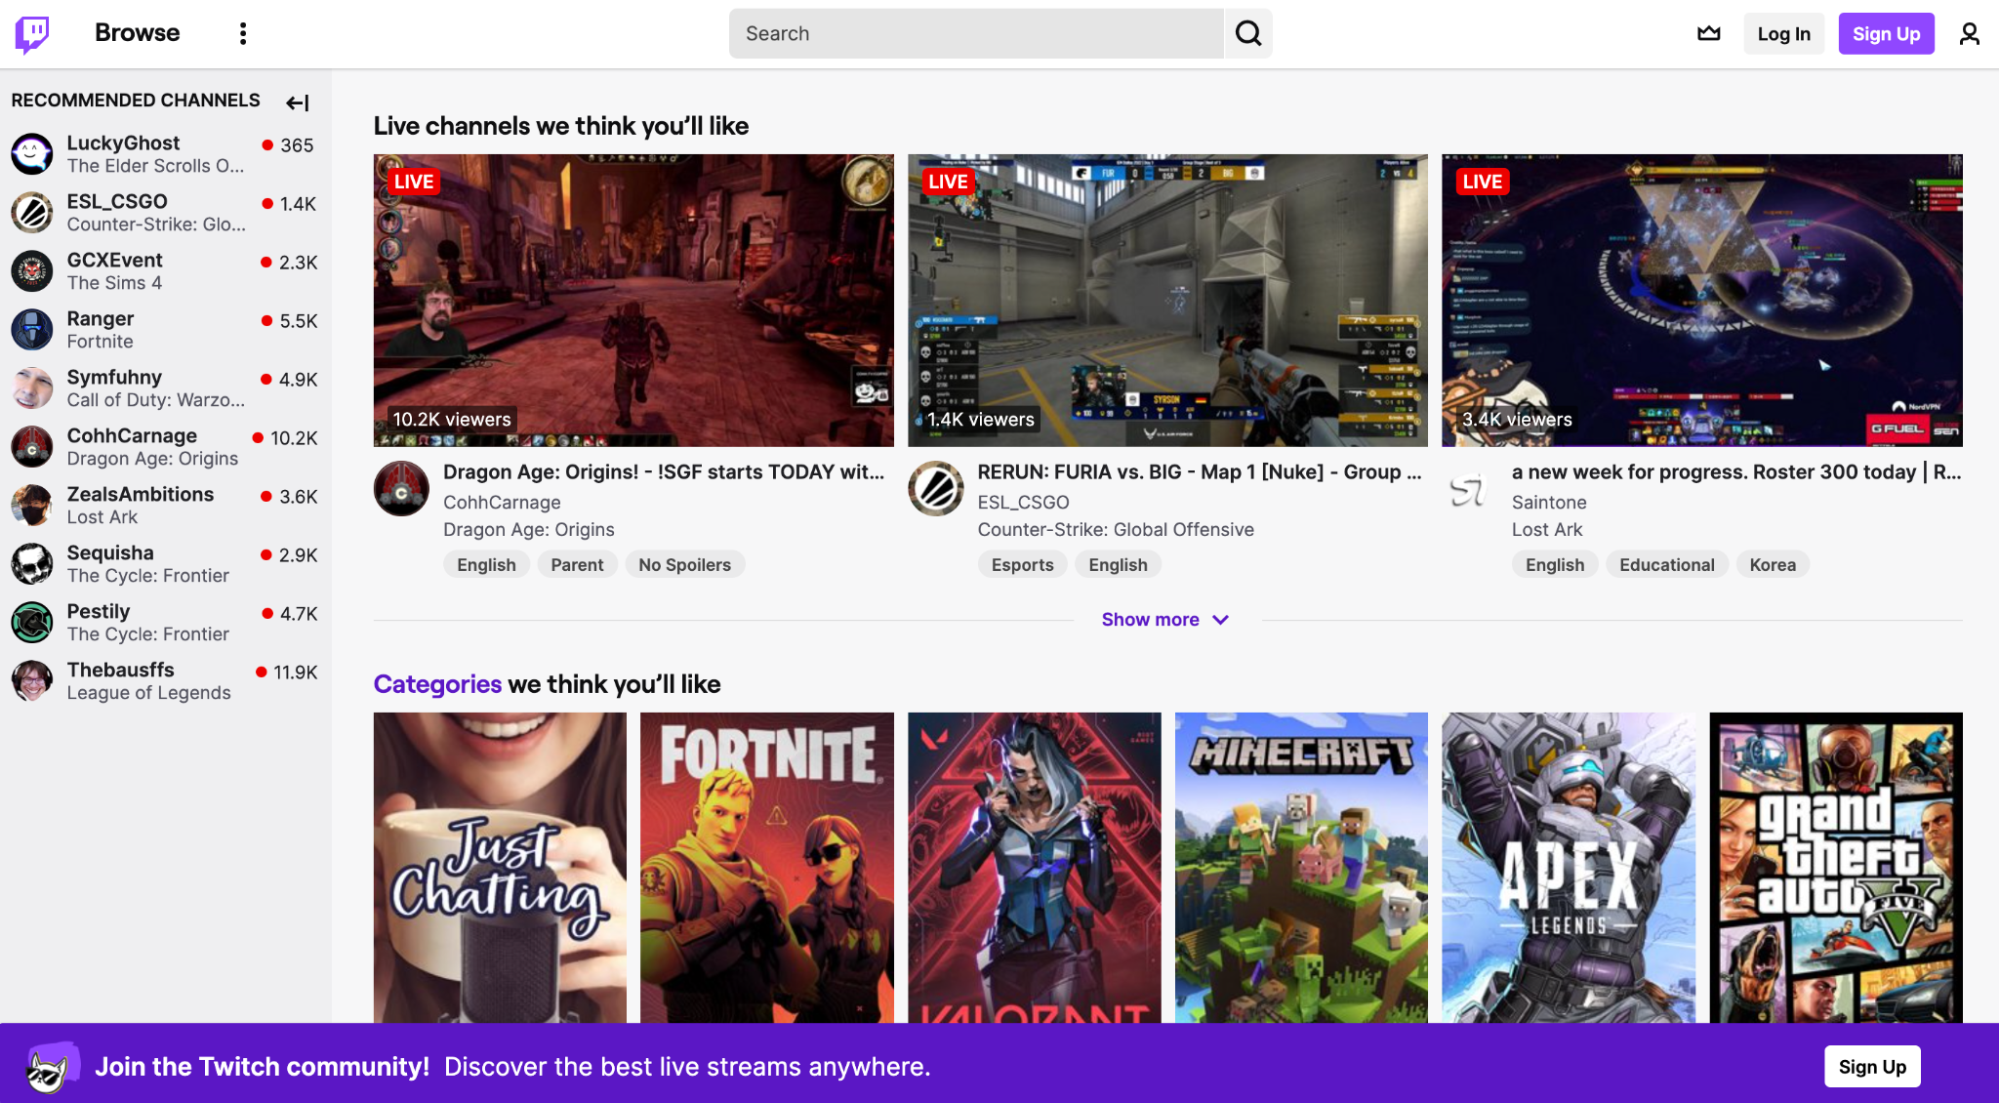 How To Make Money on Twitch: The Ultimate Guide